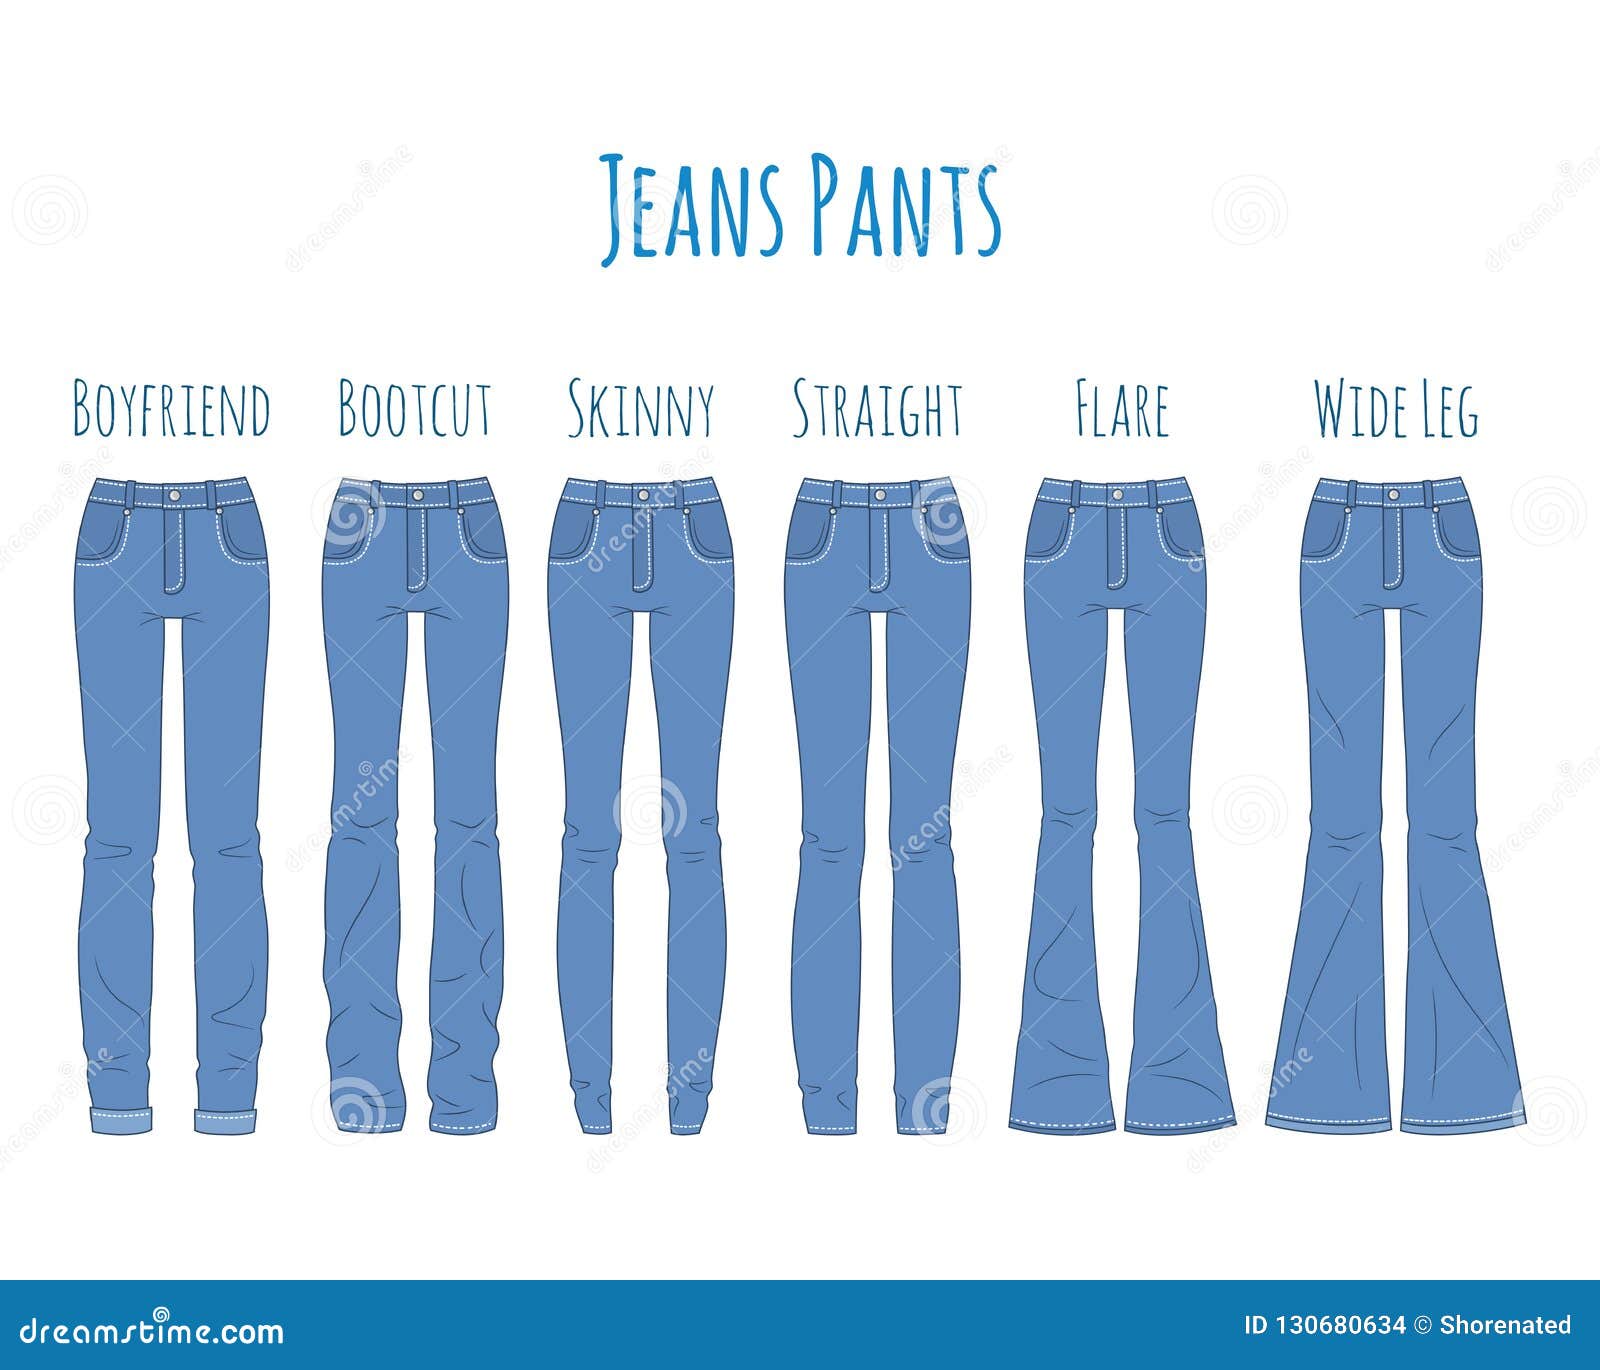 Bra icon set different types of bras and pants Vector Image